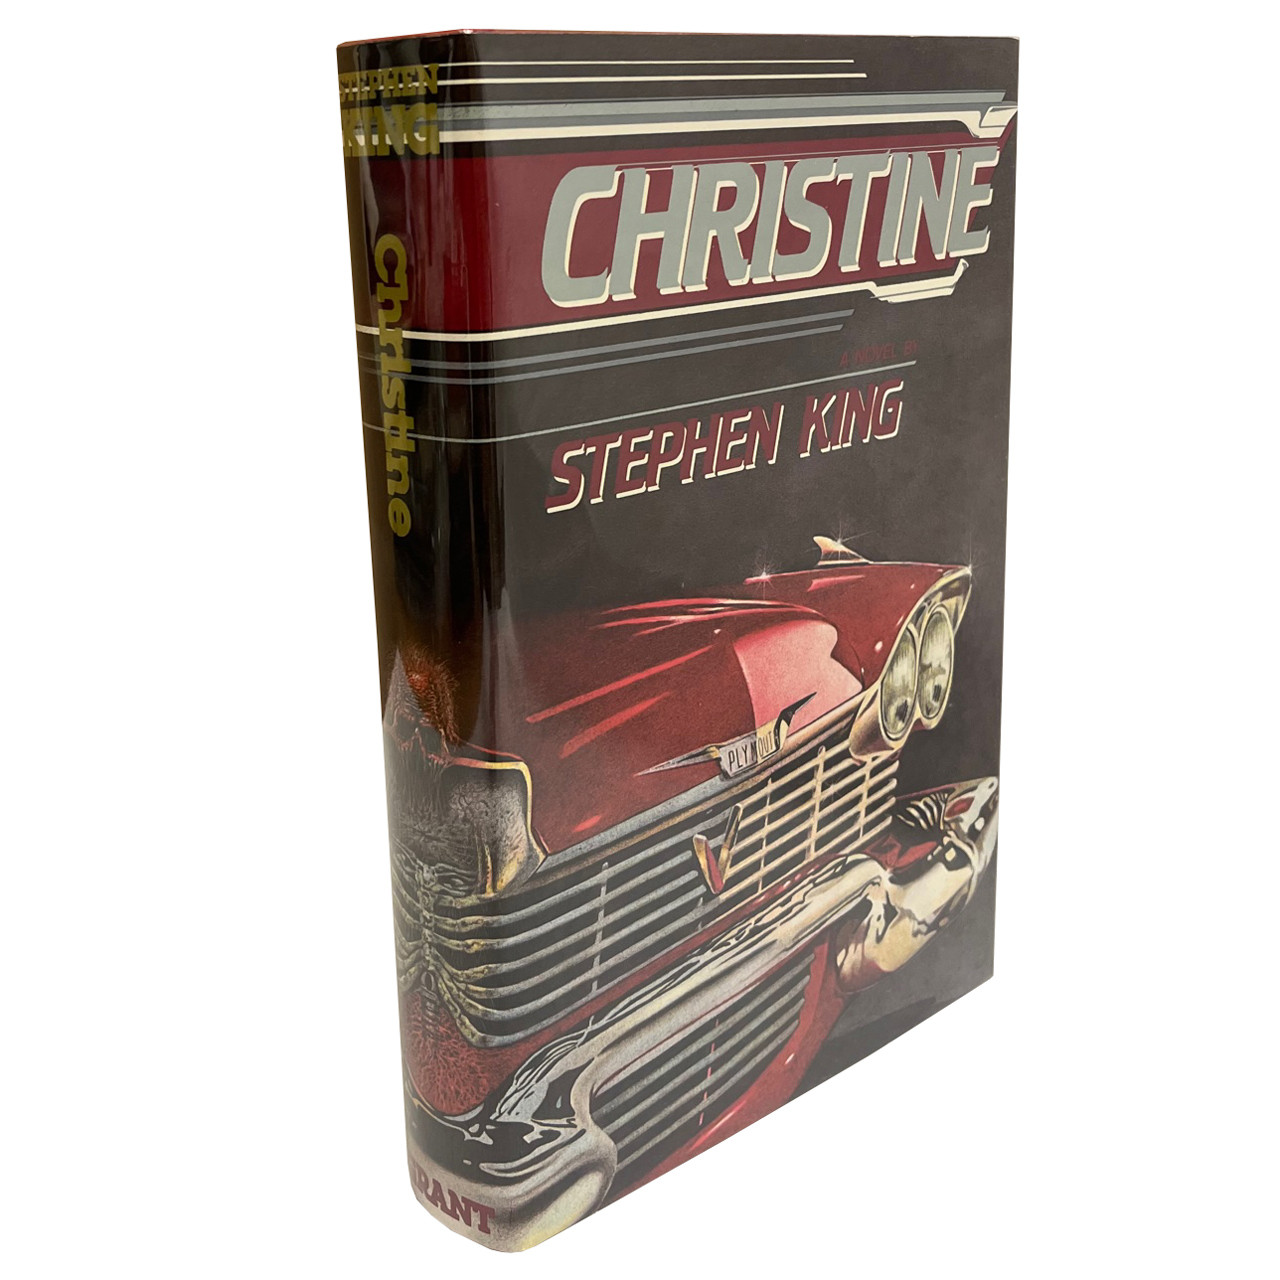 Stephen King "Christine" Slipcased Signed Limited Deluxe First Edition No. 830 of 1,000